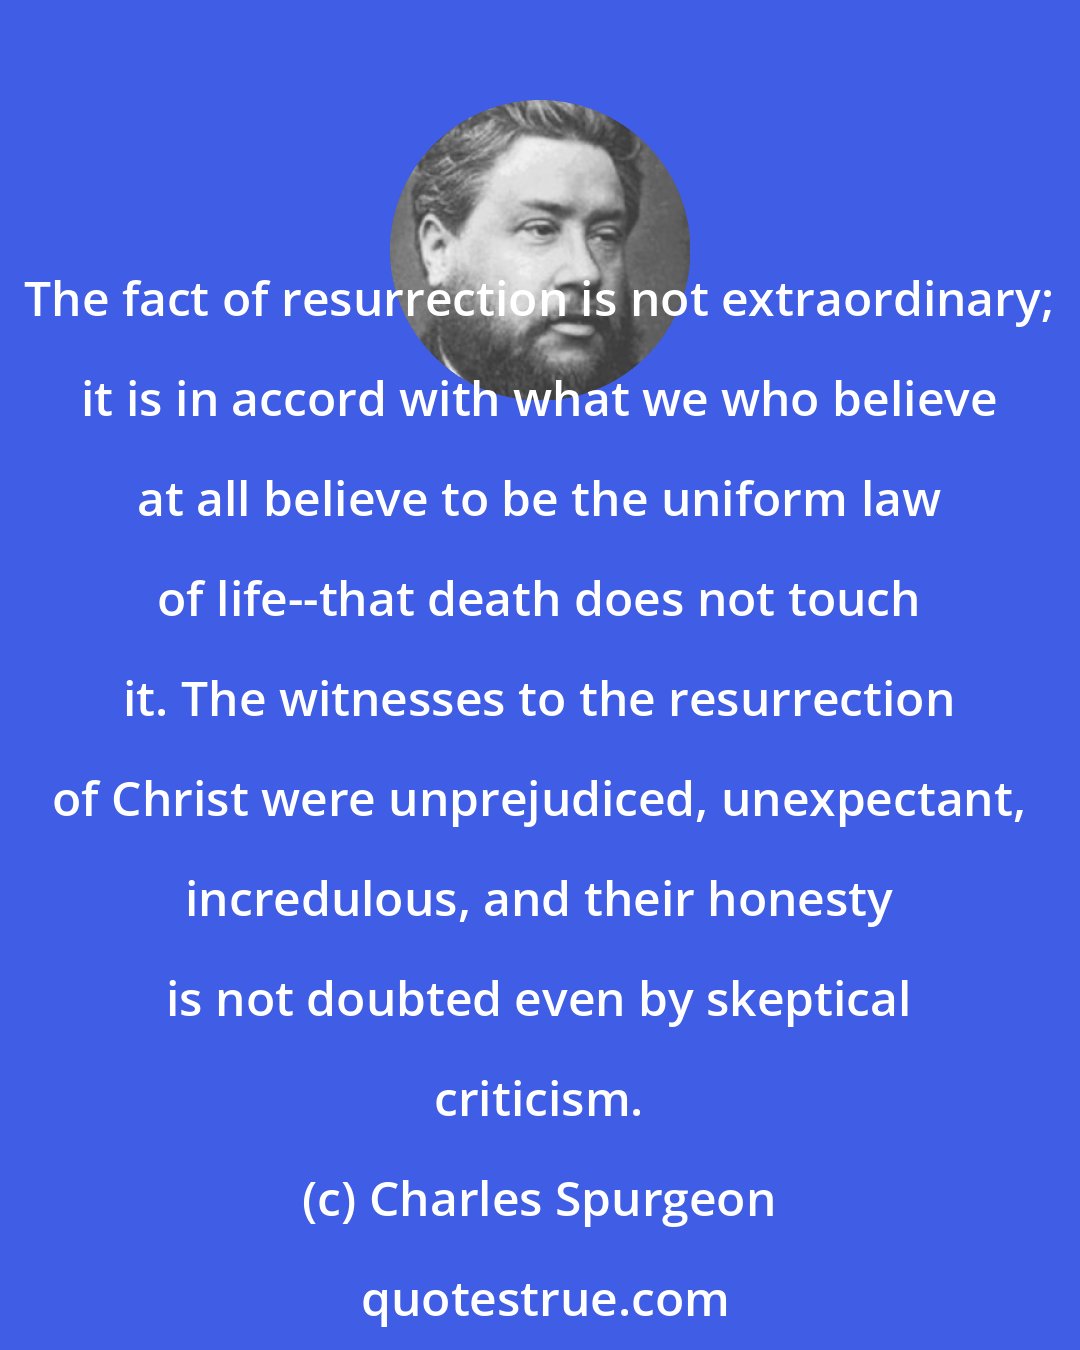 Charles Spurgeon: The fact of resurrection is not extraordinary; it is in accord with what we who believe at all believe to be the uniform law of life--that death does not touch it. The witnesses to the resurrection of Christ were unprejudiced, unexpectant, incredulous, and their honesty is not doubted even by skeptical criticism.